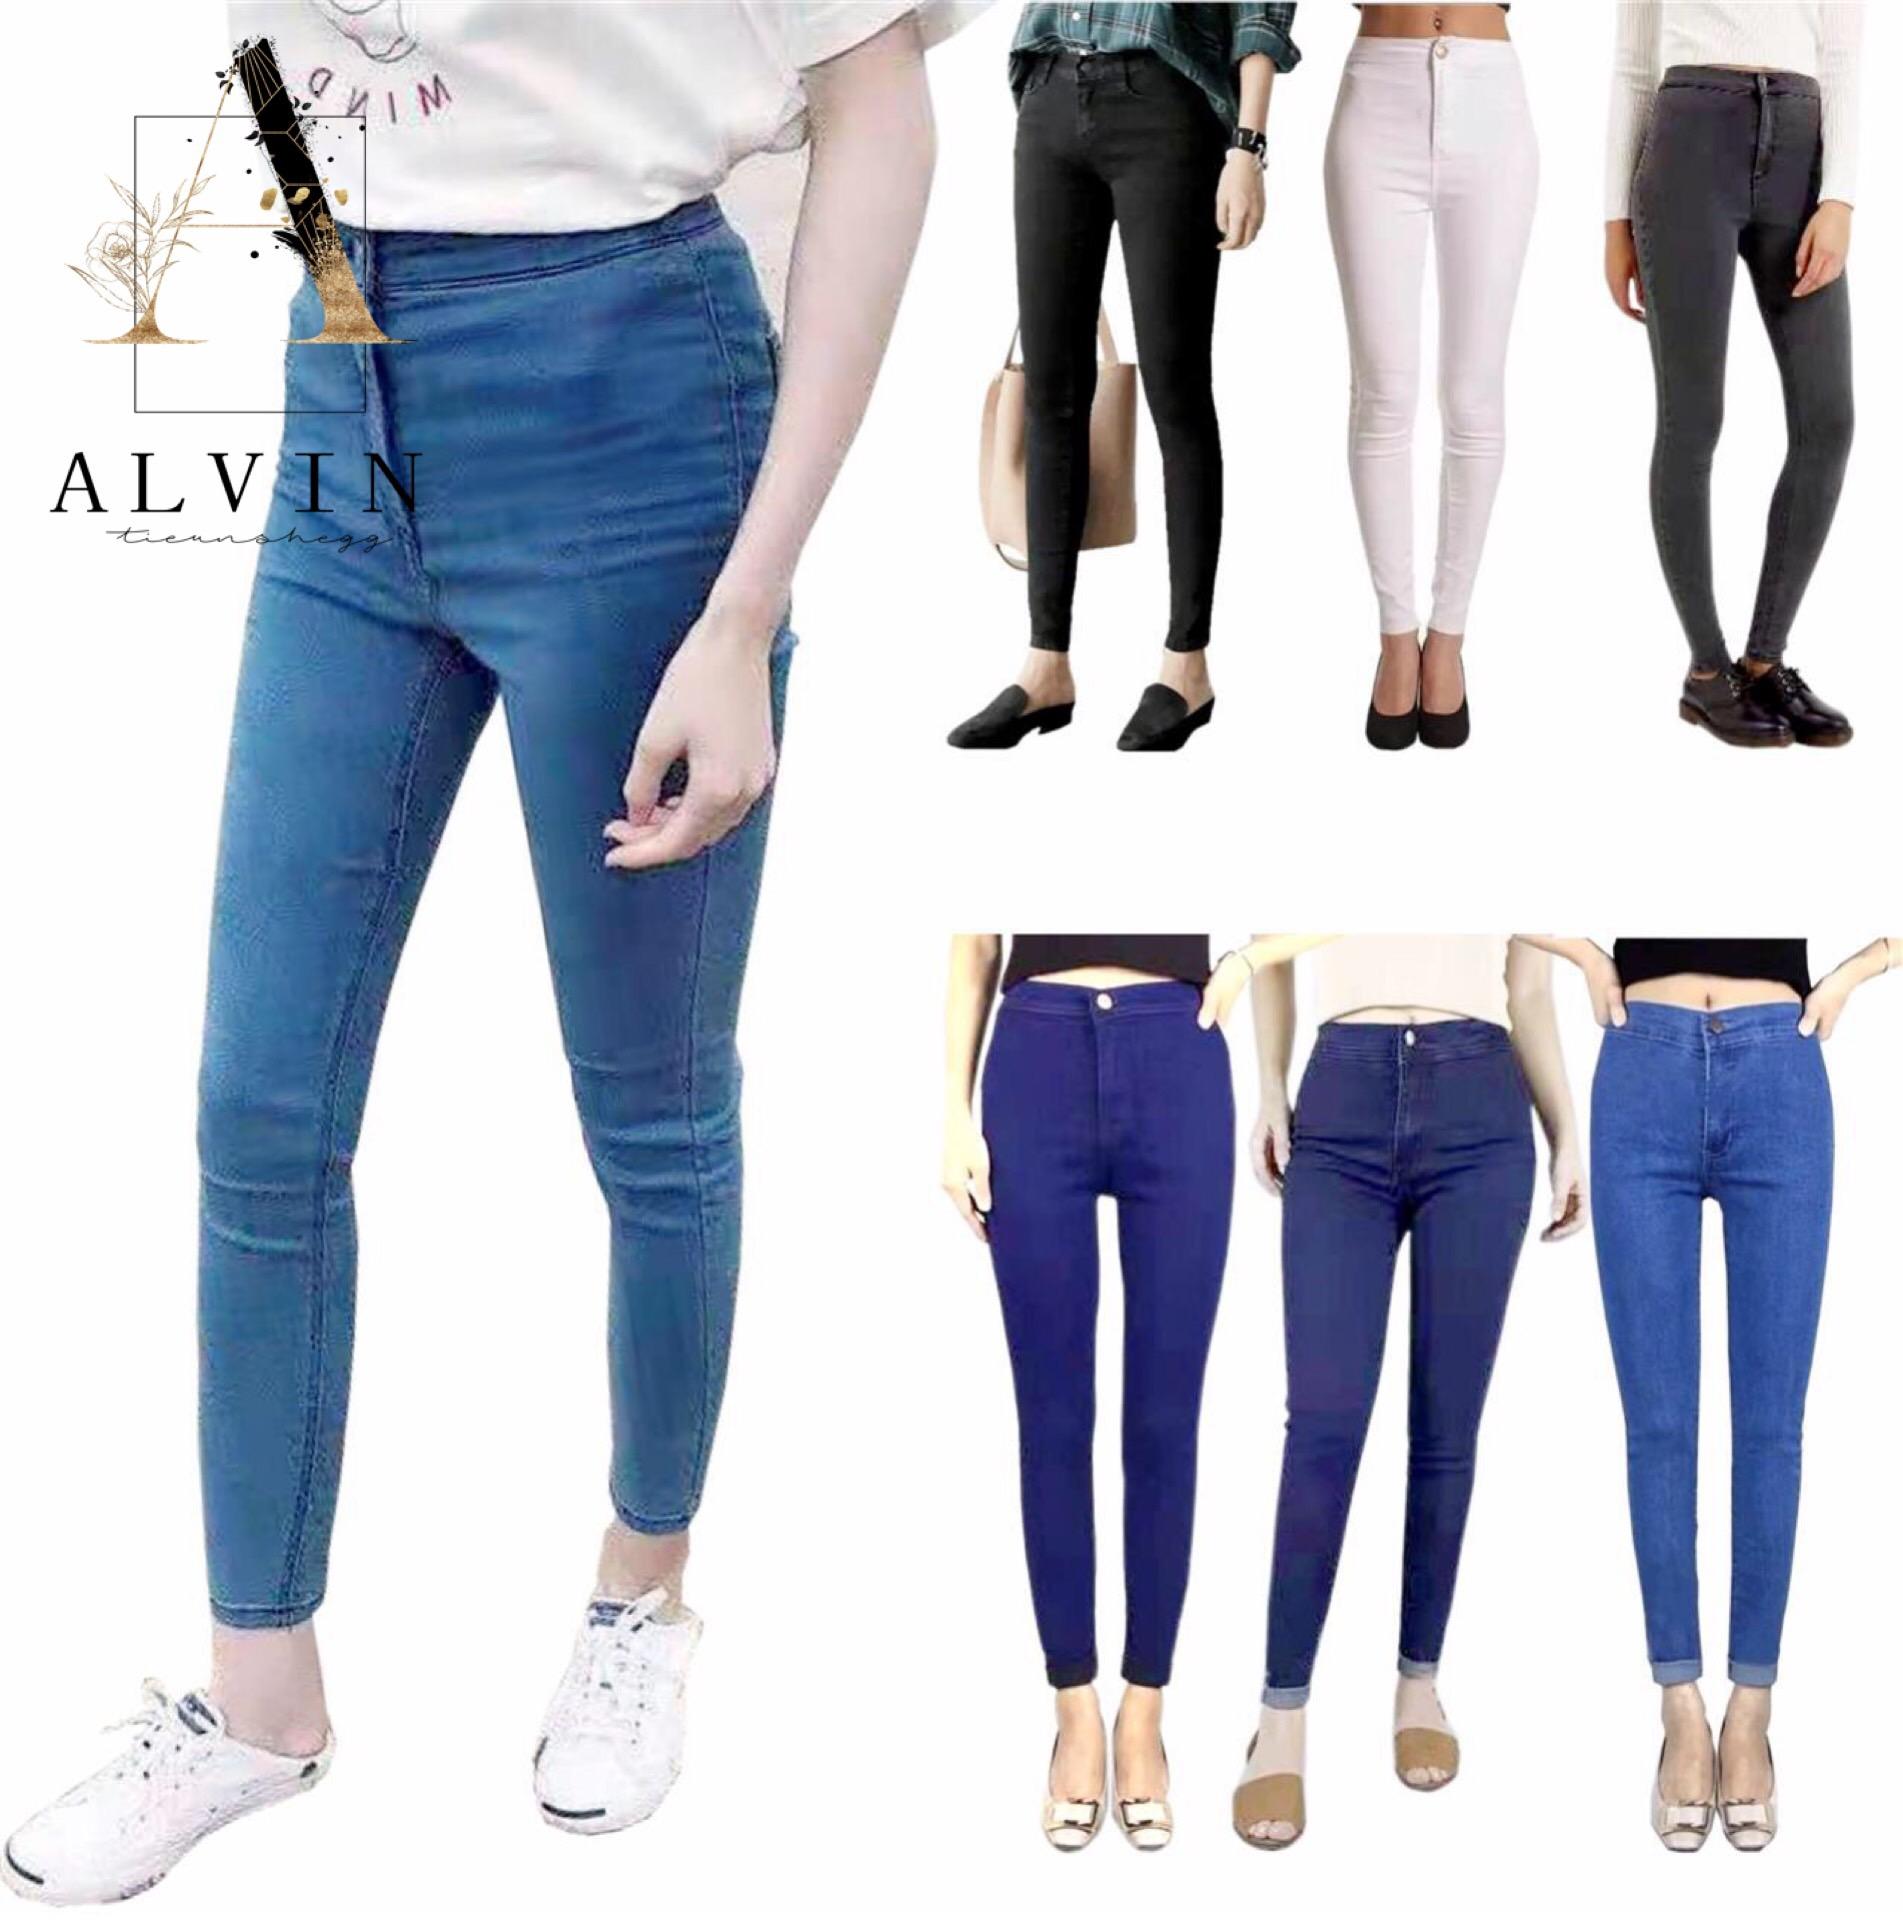 Jeans for Women for sale - Fashion 